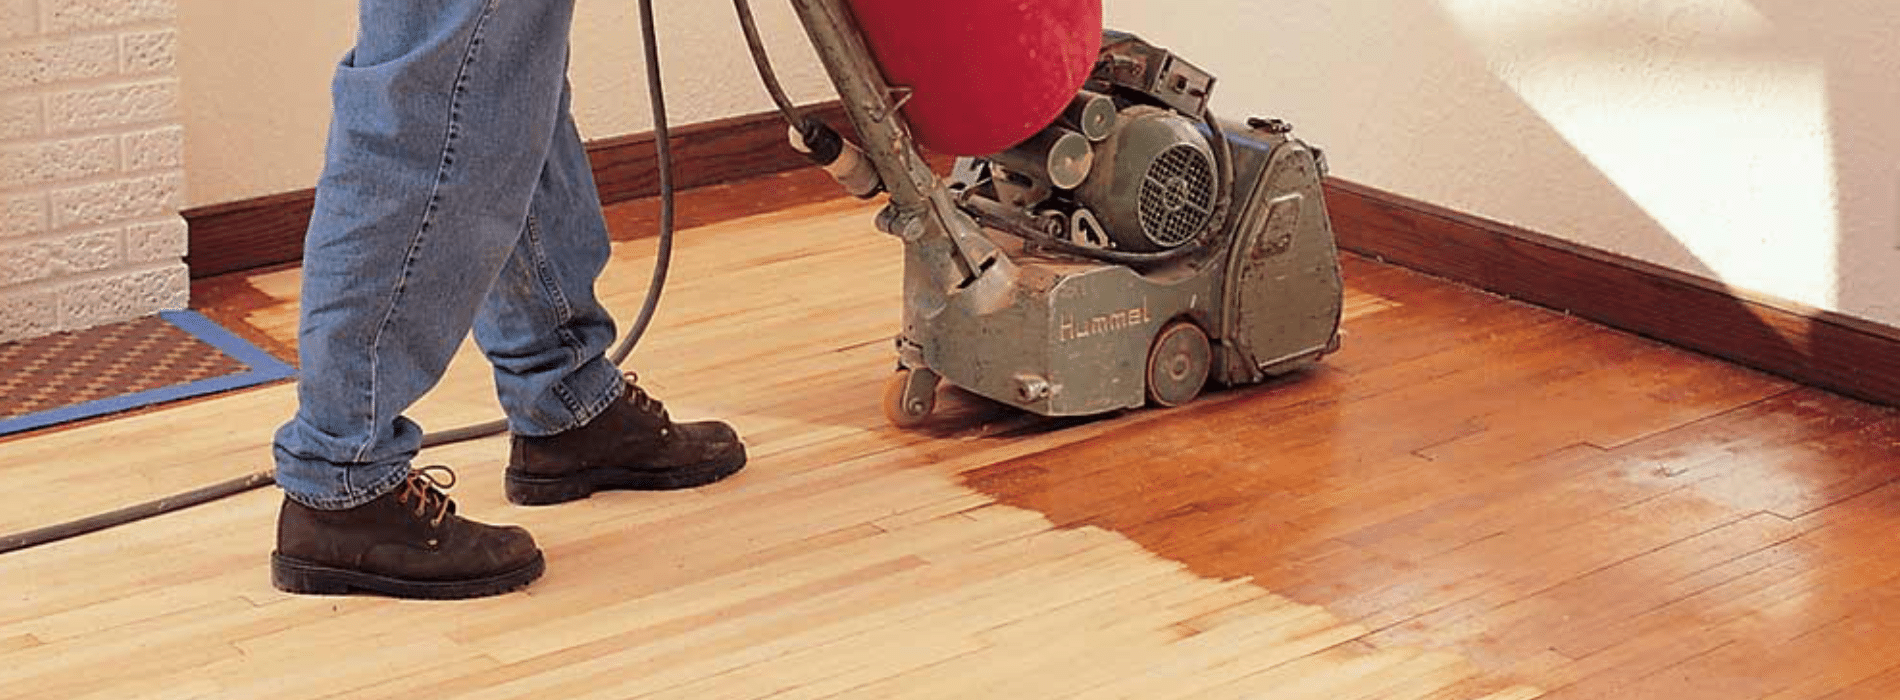 Mr Sander® are using a Bona Scorpion drum sander, measuring 200 mm, with a power output of 1.5 kW. It operates at 240 V and 50 Hz frequency in Bermondsey, SE1. A dust extraction system with a HEPA filter ensures a clean and efficient sanding process for the herringbone floor. 